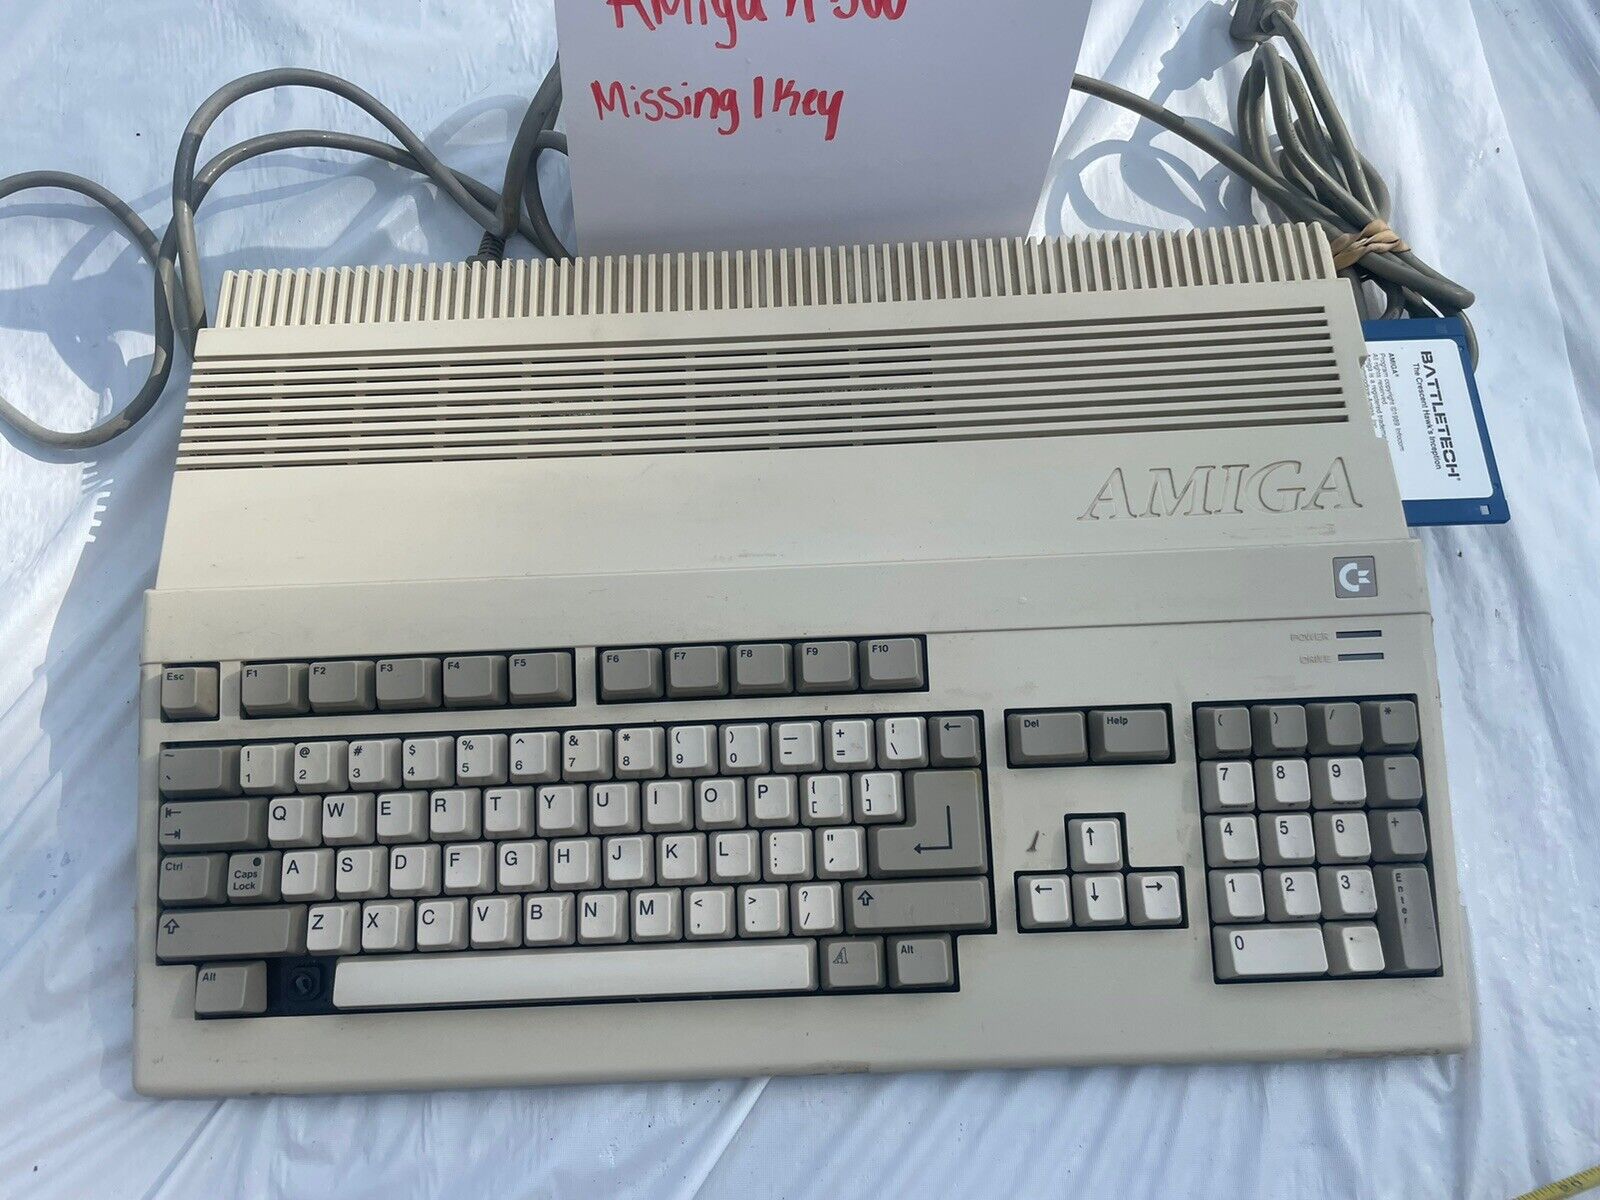 Vintage Commodore Amiga 500 Computer Keyboard Model A500 Tested Works As Is